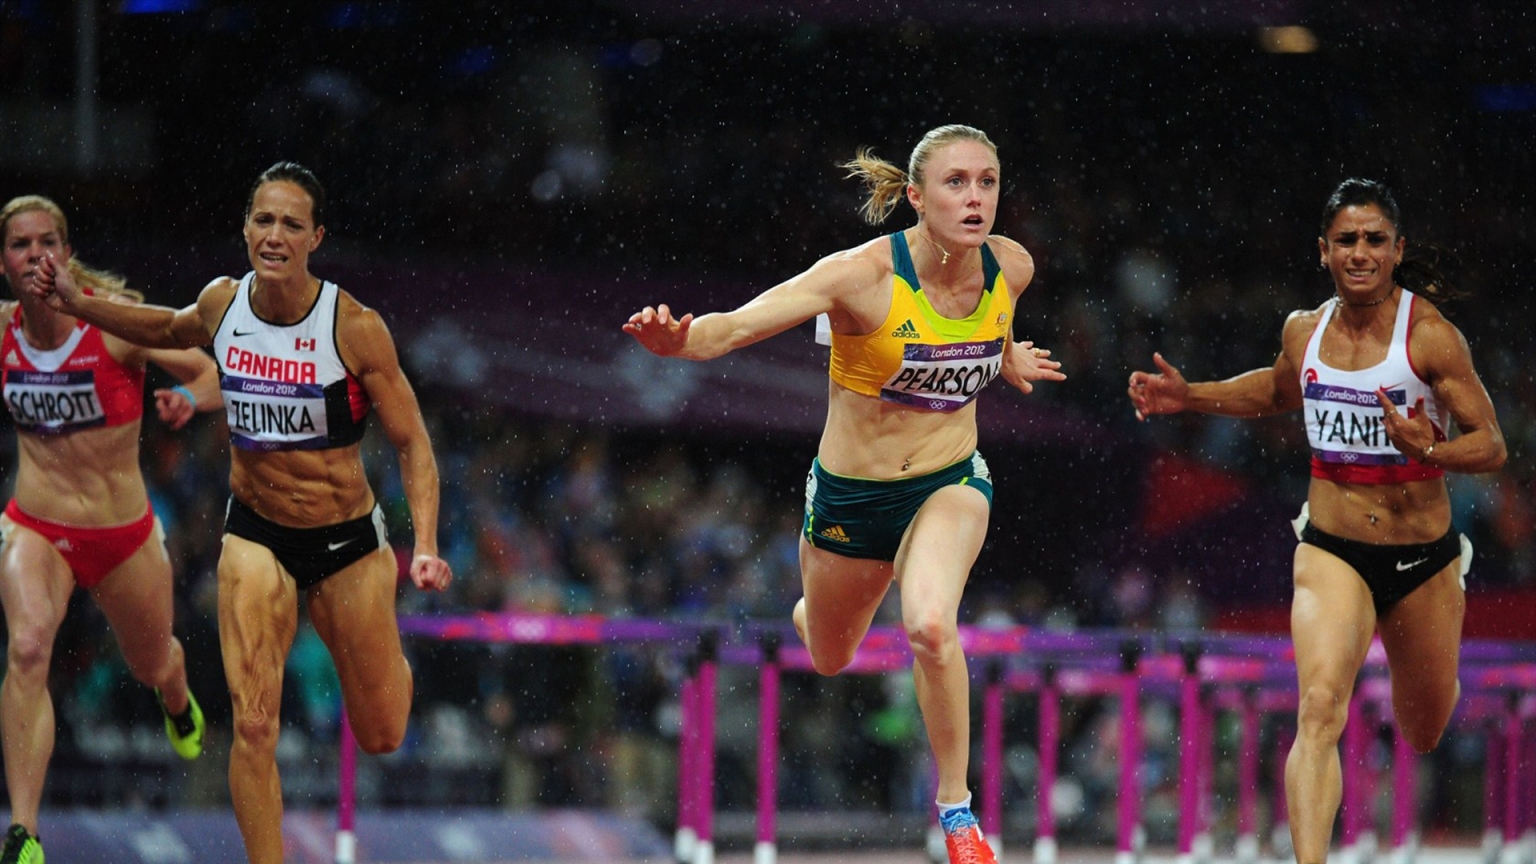 Sally Pearson for 1536 x 864 HDTV resolution